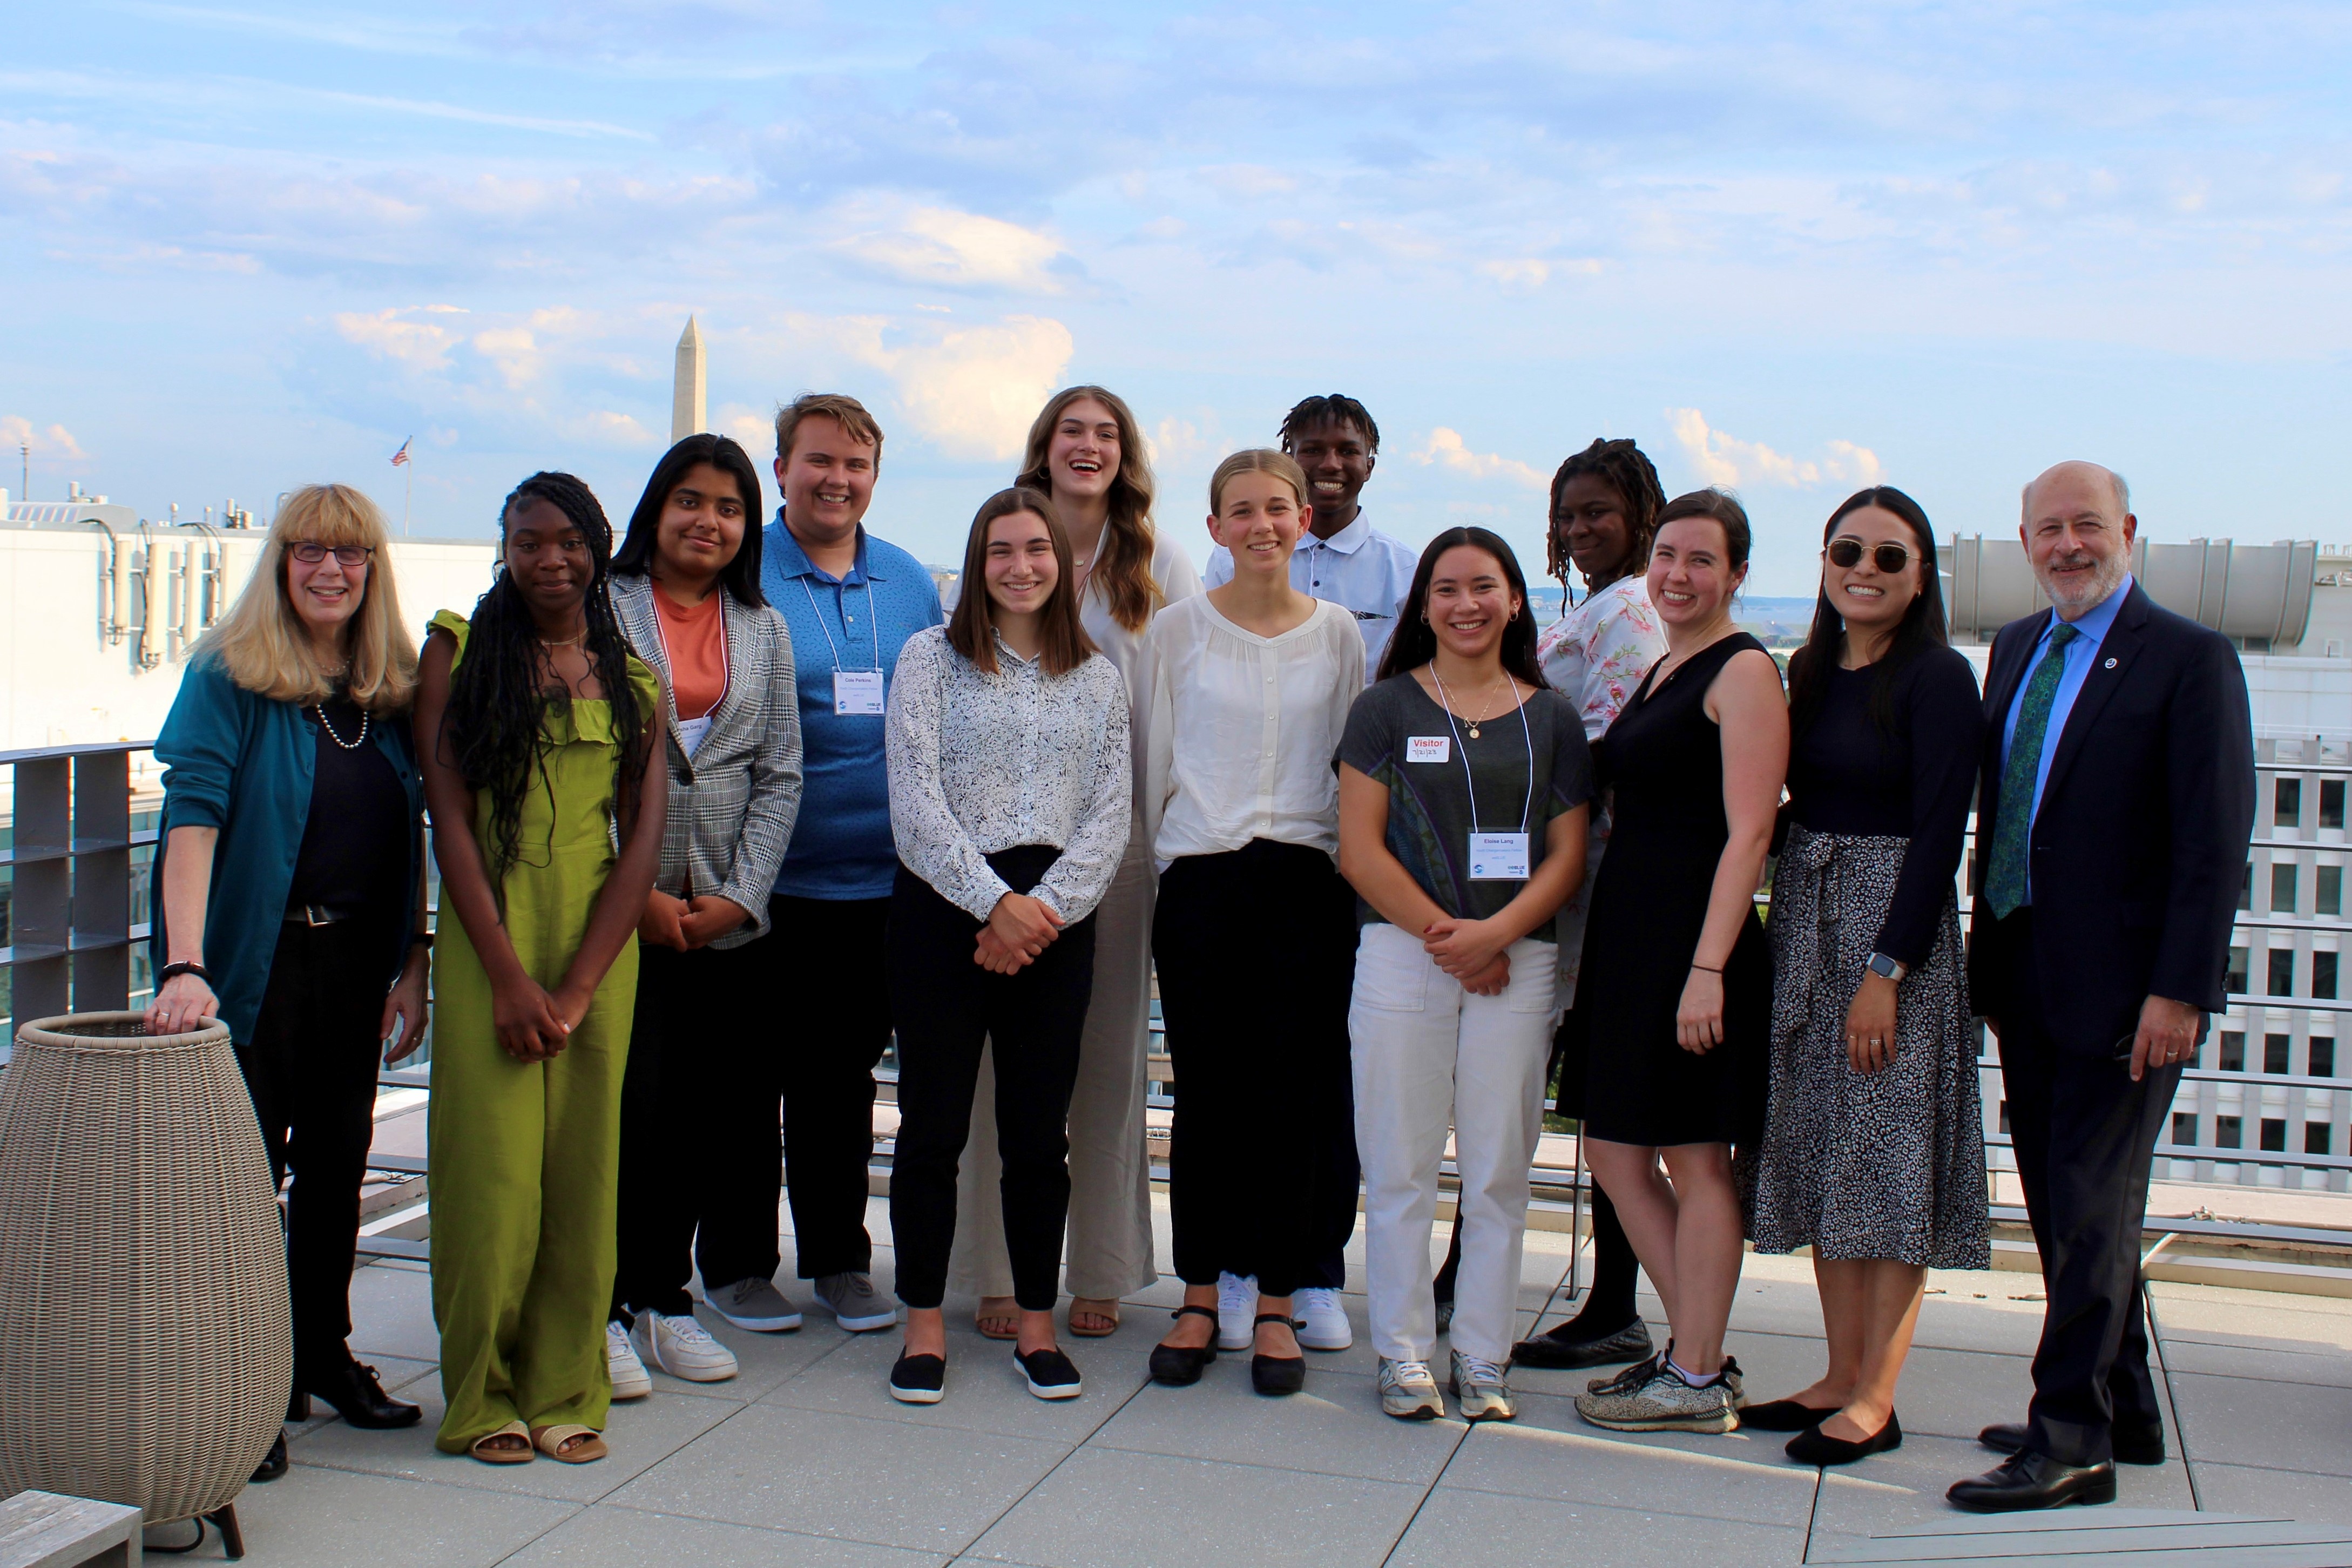 A group of 13 people, nine high school students and four adults, smile at the camera. They are standing on a rooftop patio in Washington, DC, with the Washington Monument in the background.